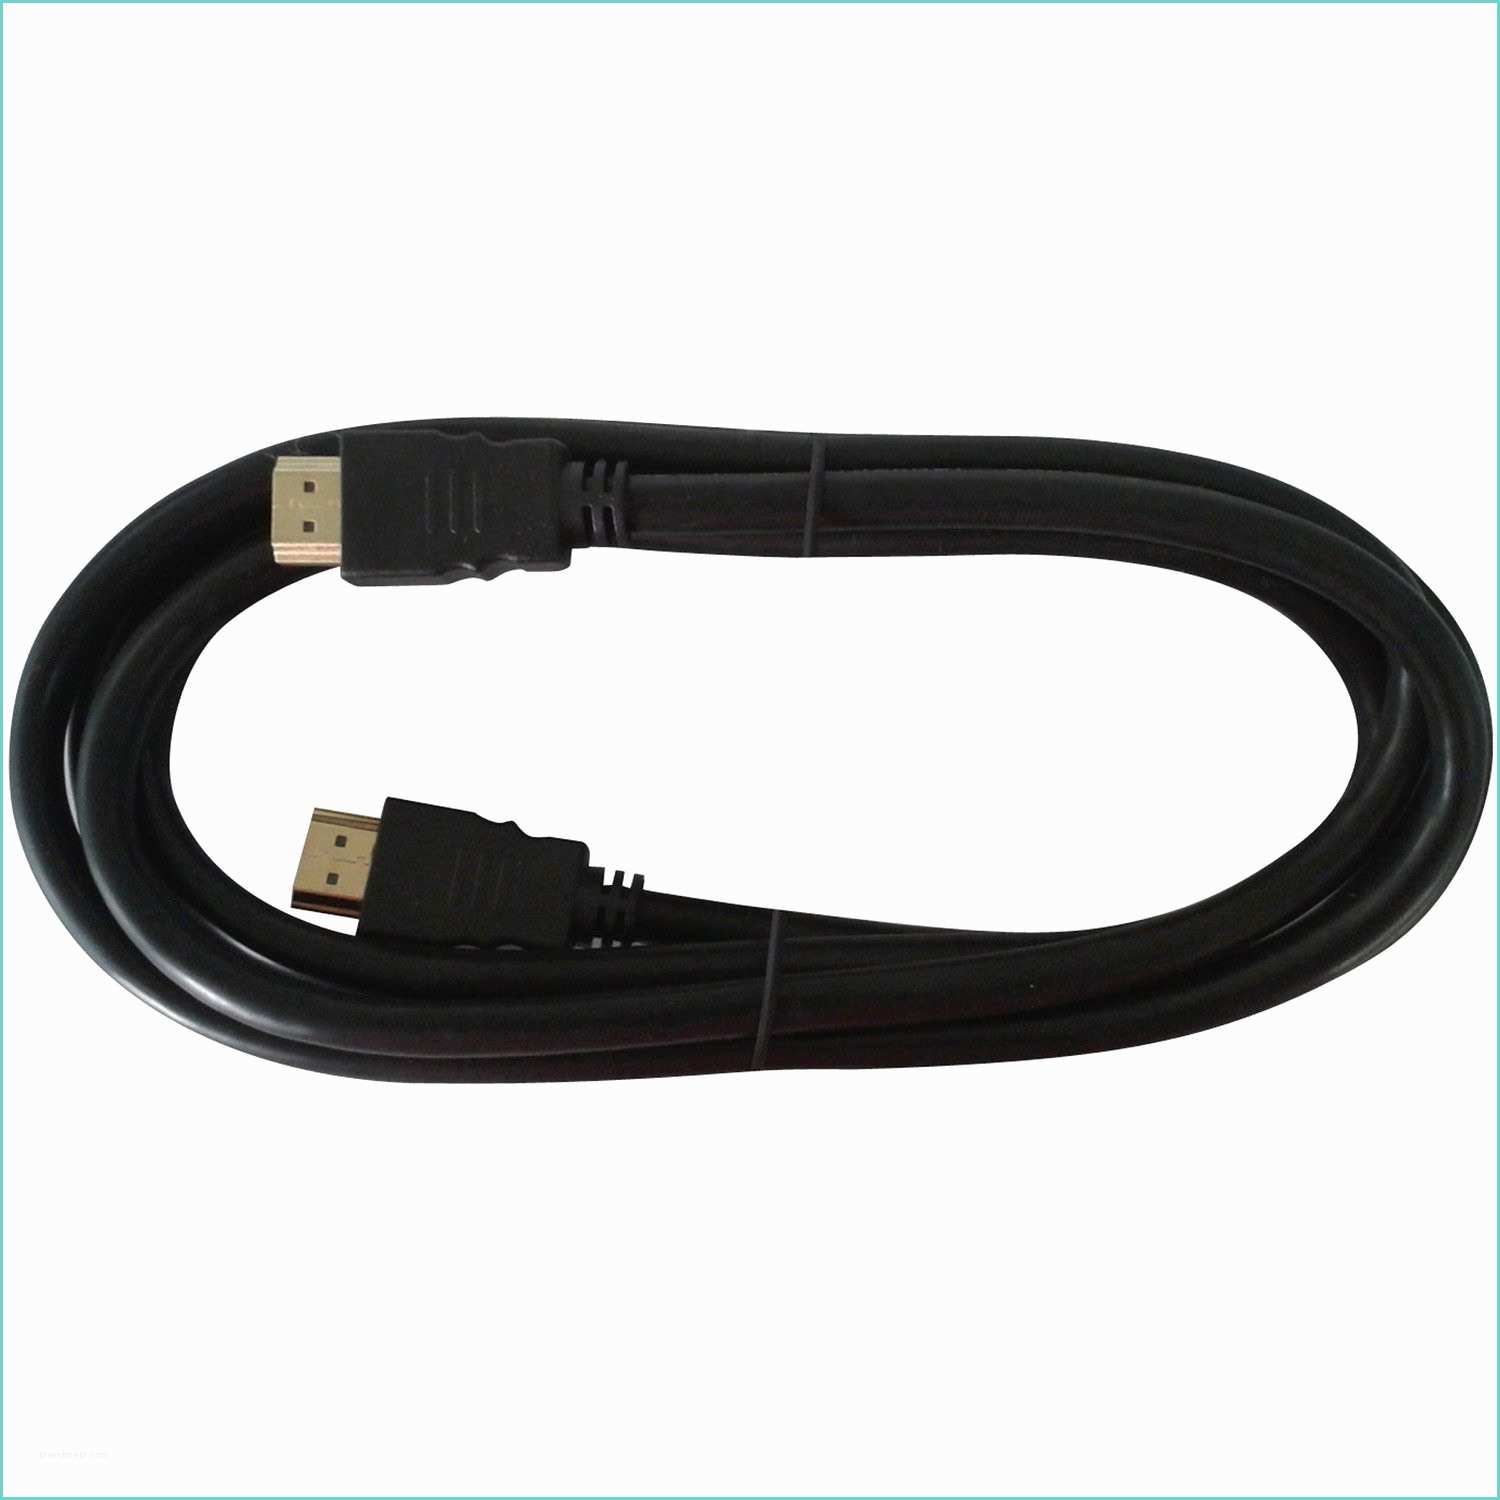 Cache Fil Tv Mural Finest Protege Cable sol Leroy Merlin Trendy Cable